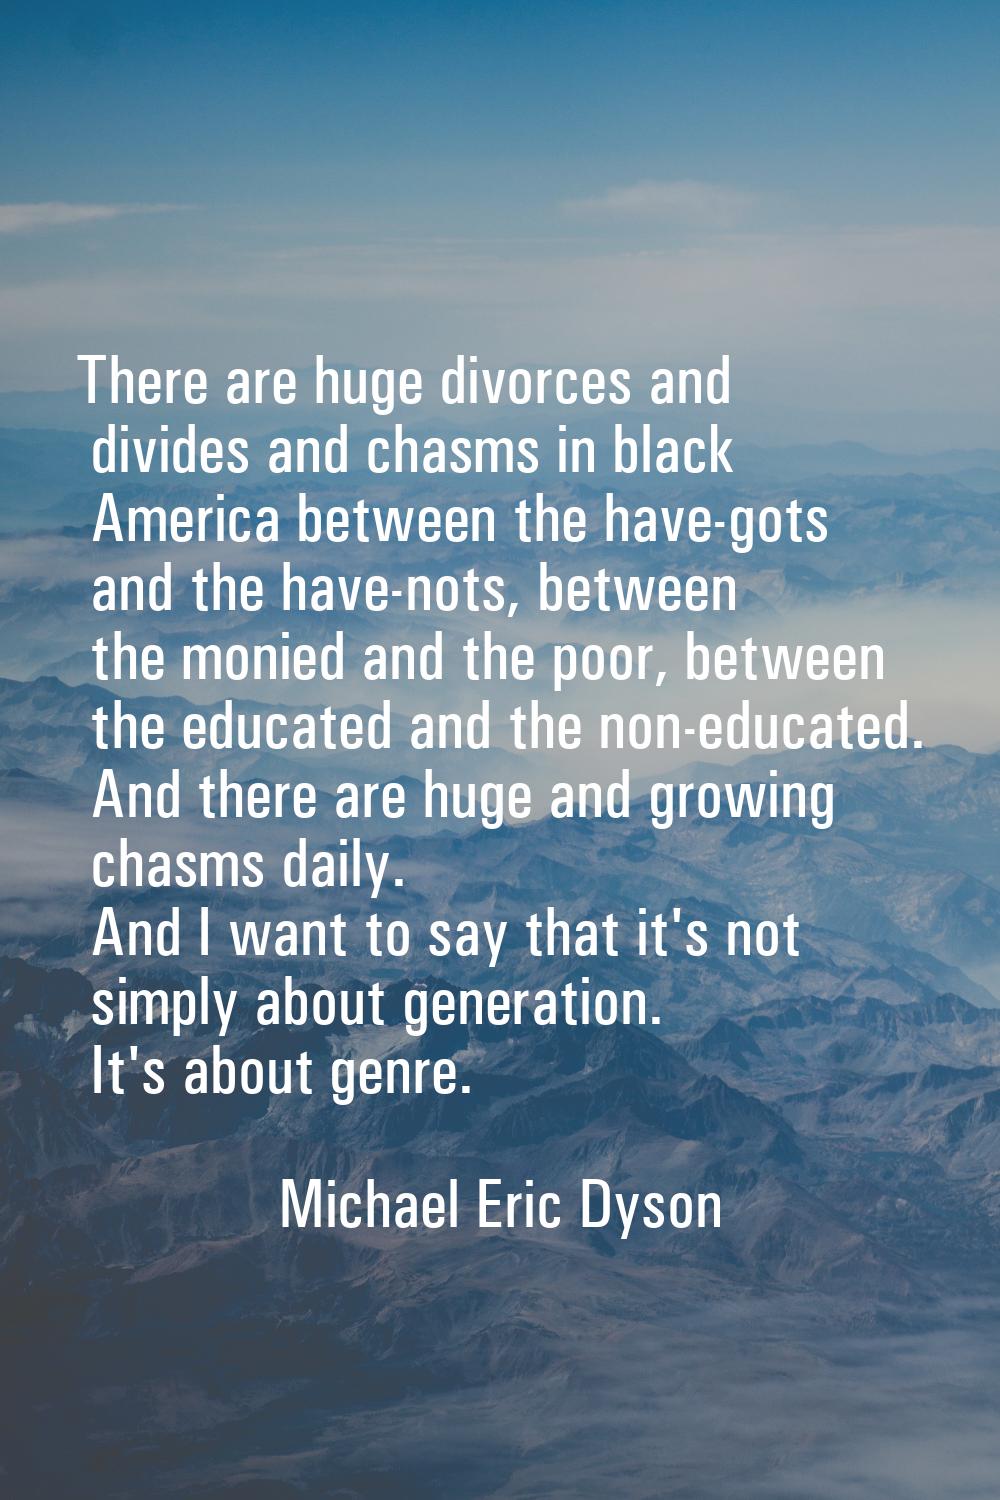 There are huge divorces and divides and chasms in black America between the have-gots and the have-